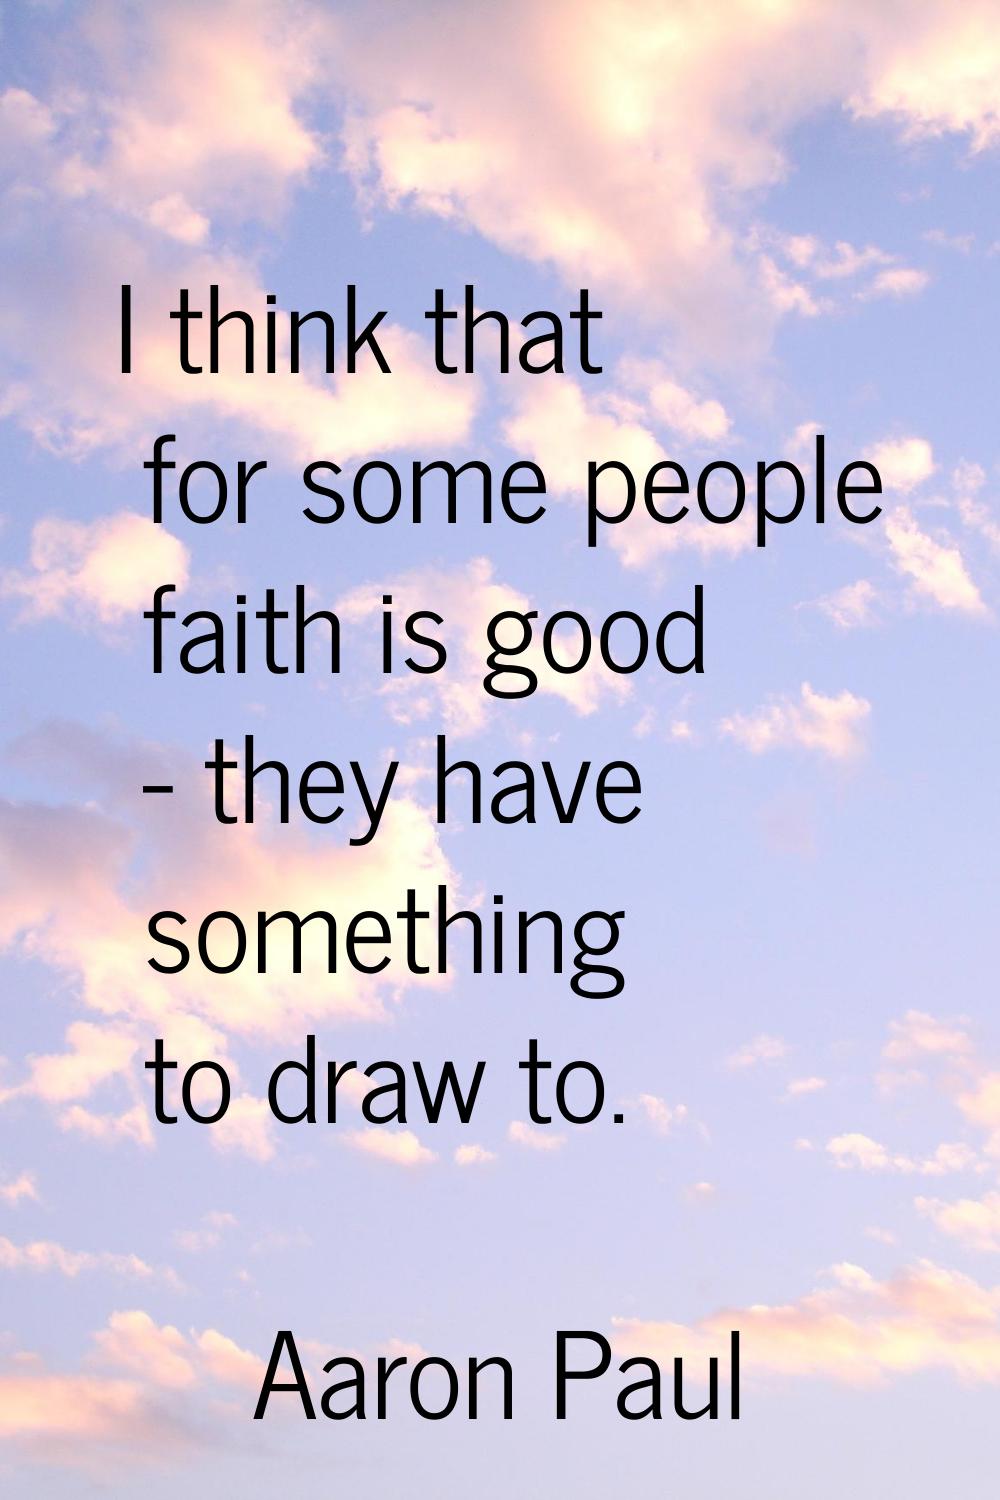 I think that for some people faith is good - they have something to draw to.